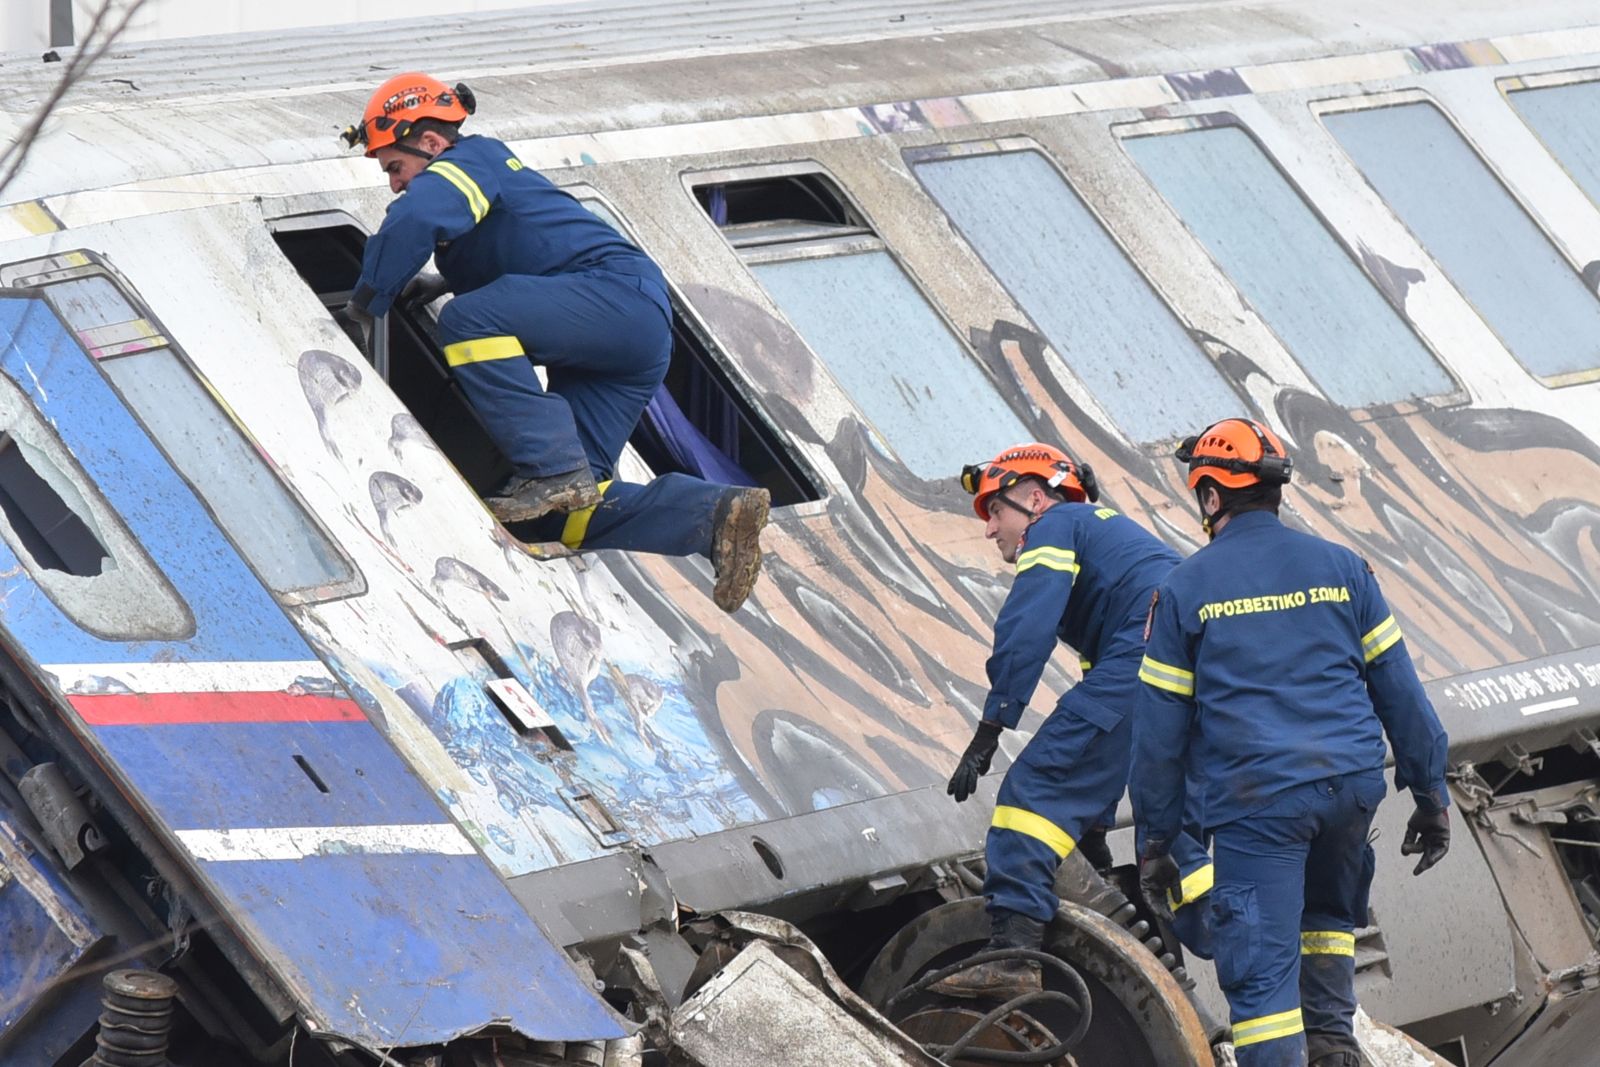 epa10497209 Firefighters and rescue crews work to extricate passengers from trains after a collision near Larissa city, Greece, 01 March 2023. Fire fighter and ambulance service crews remain at the scene, while special crews were using cutting tools and blow torches to cut and prise apart the remains of the carriages to look for people or bodies possibly trapped inside. According to the latest update by the fire brigade spokesperson Vasilis Vathrakogiannis, the death toll was 36 so far and 66 people had been taken to hospital, six of which were admitted to ICUs.  EPA/APOSTOLIS DOMALIS